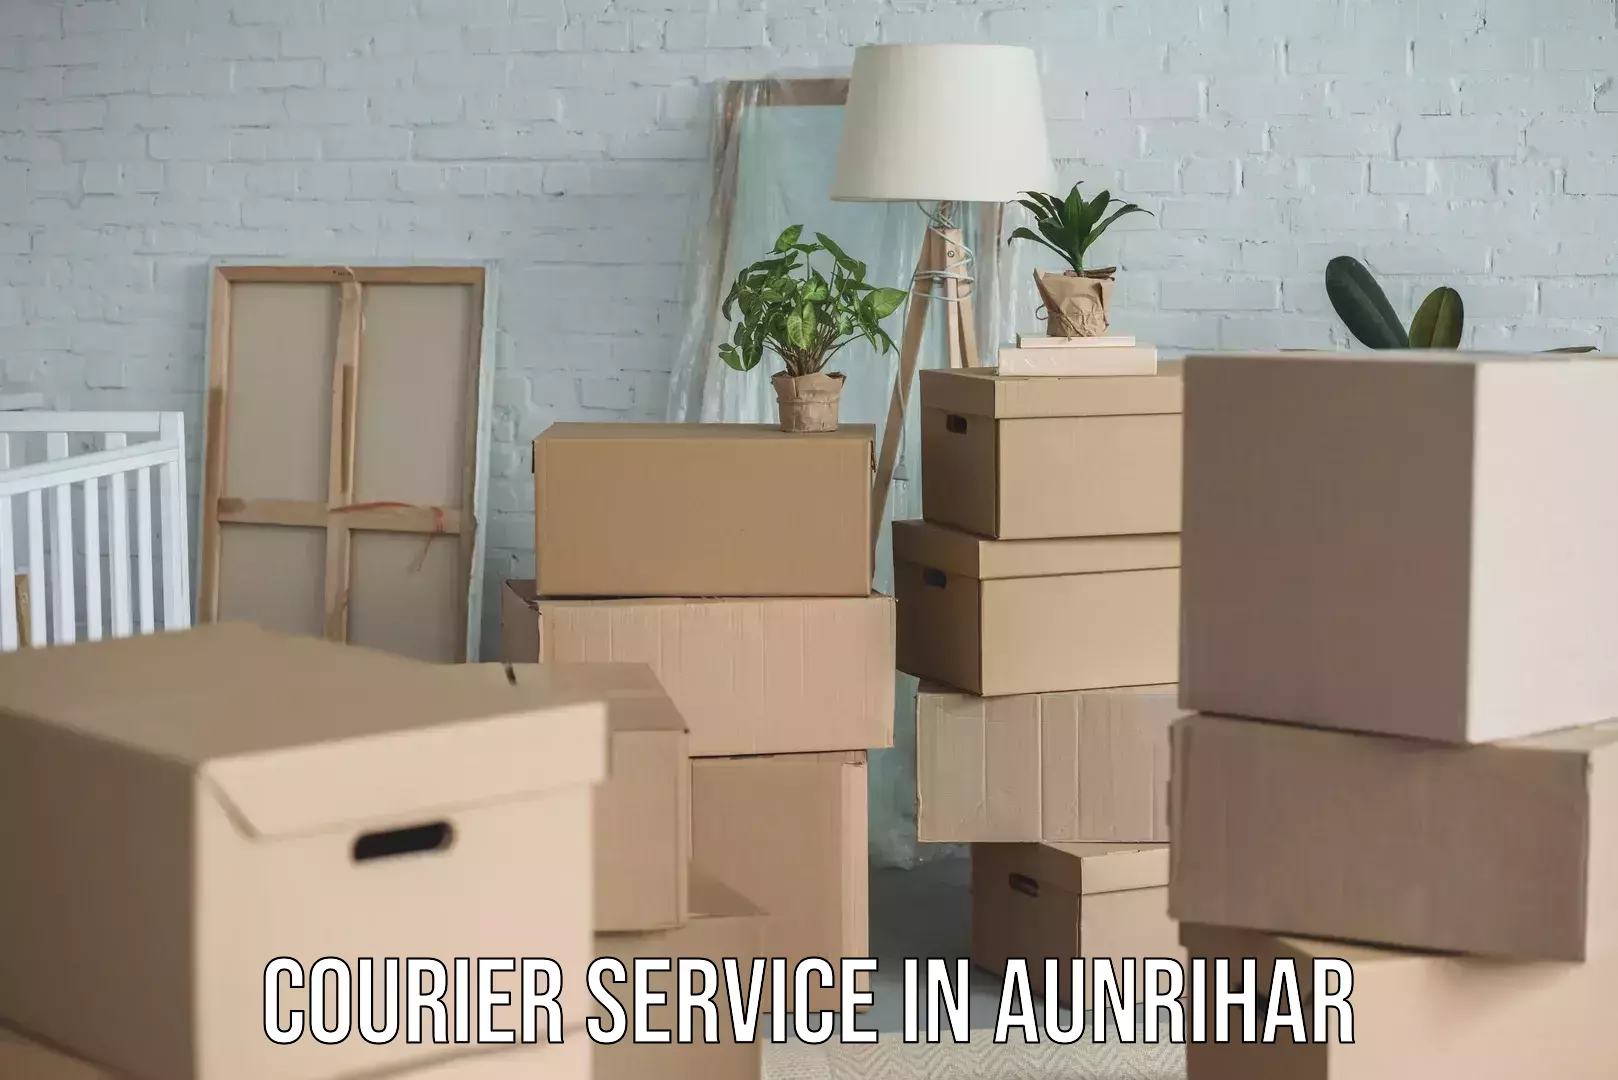 On-call courier service in Aunrihar